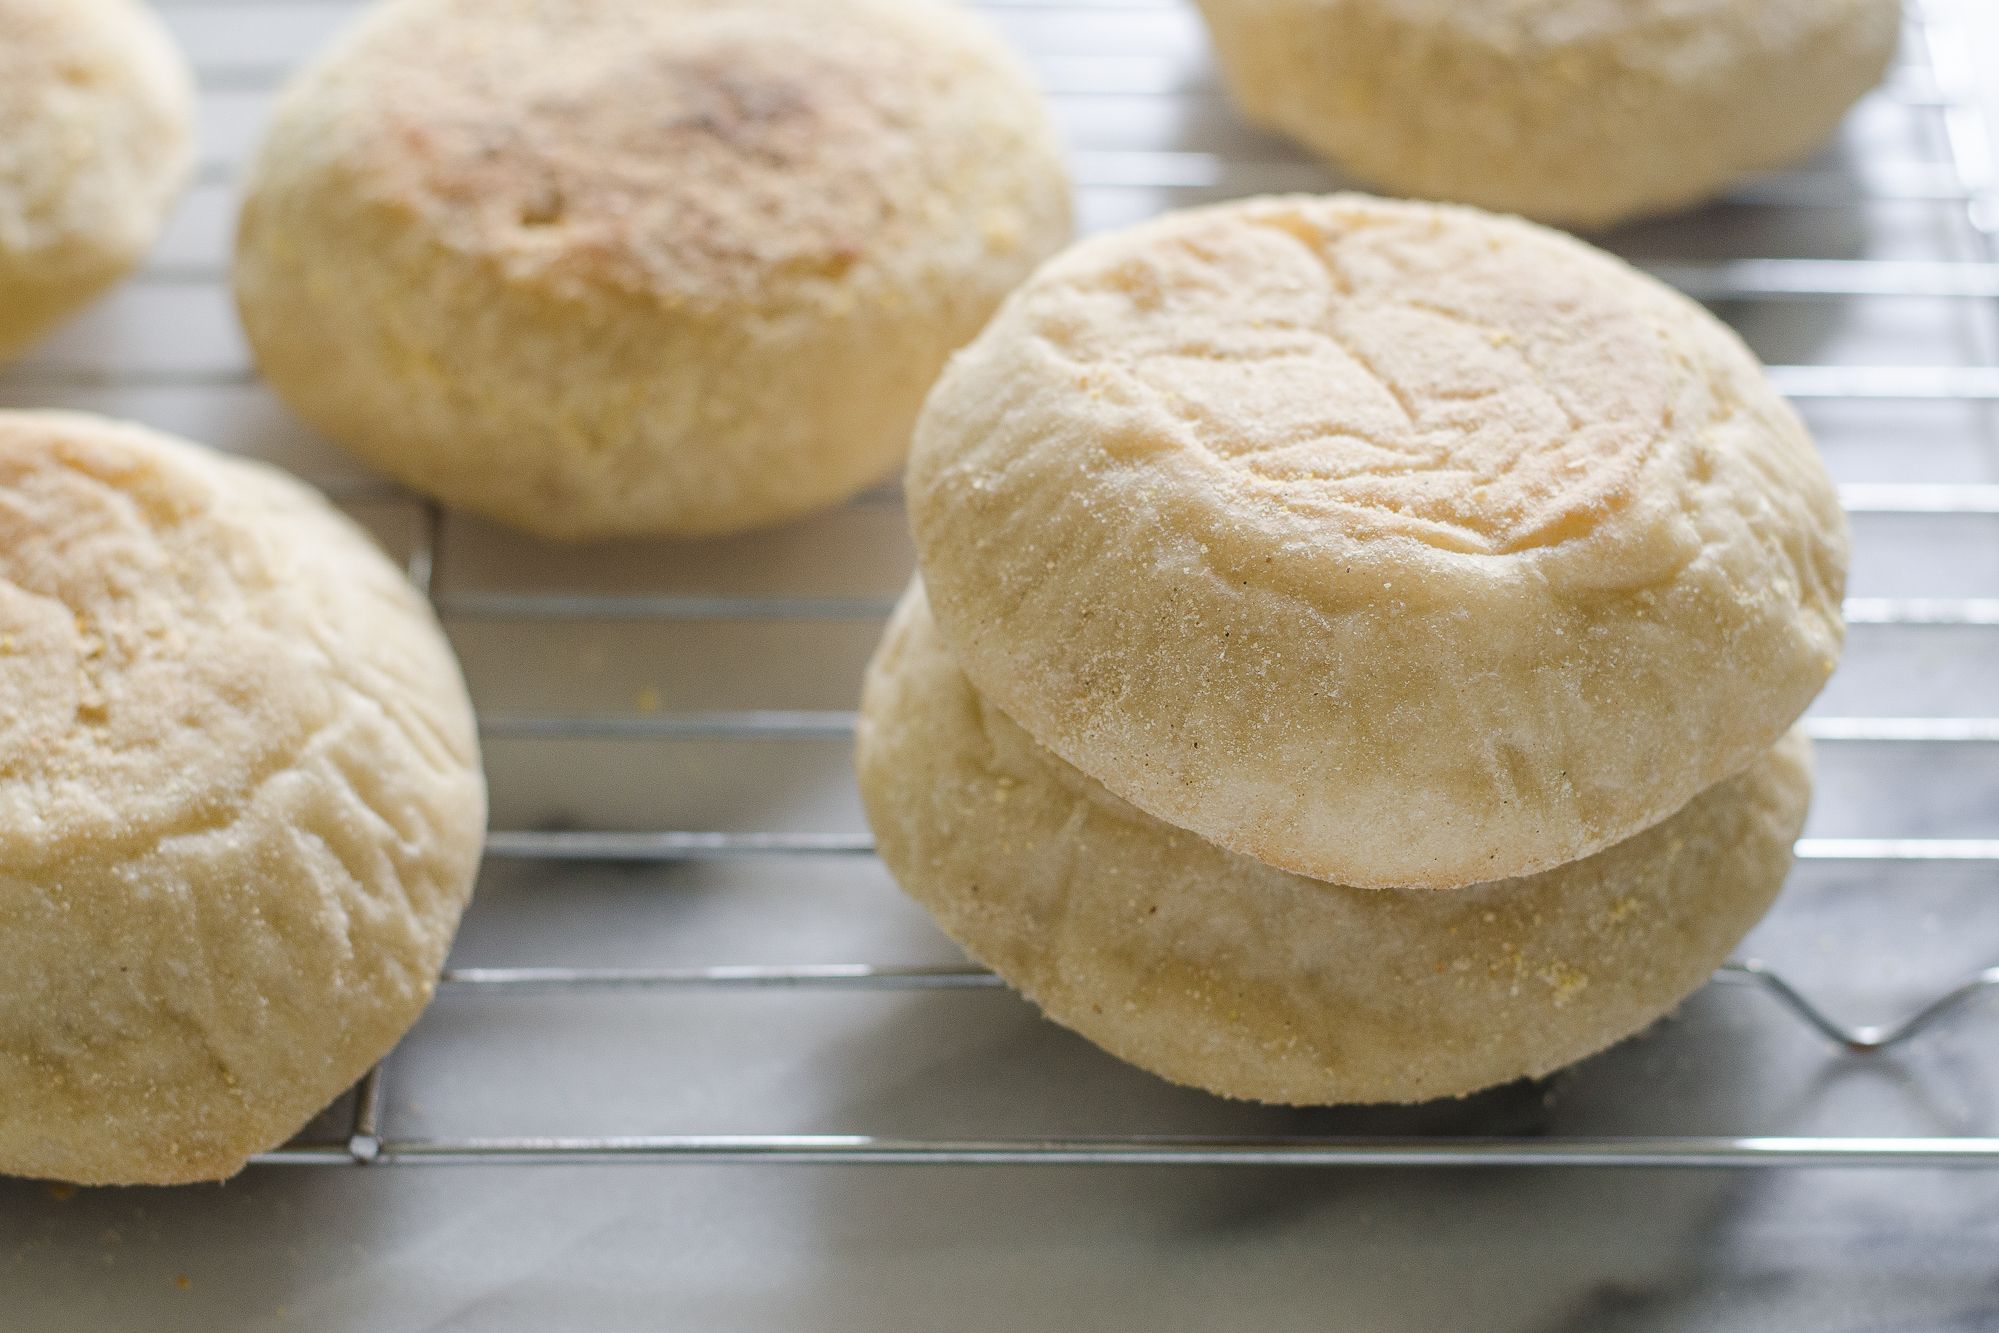 https://hips.hearstapps.com/thepioneerwoman/wp-content/uploads/2019/09/How-to-Make-English-Muffins-01.jpg